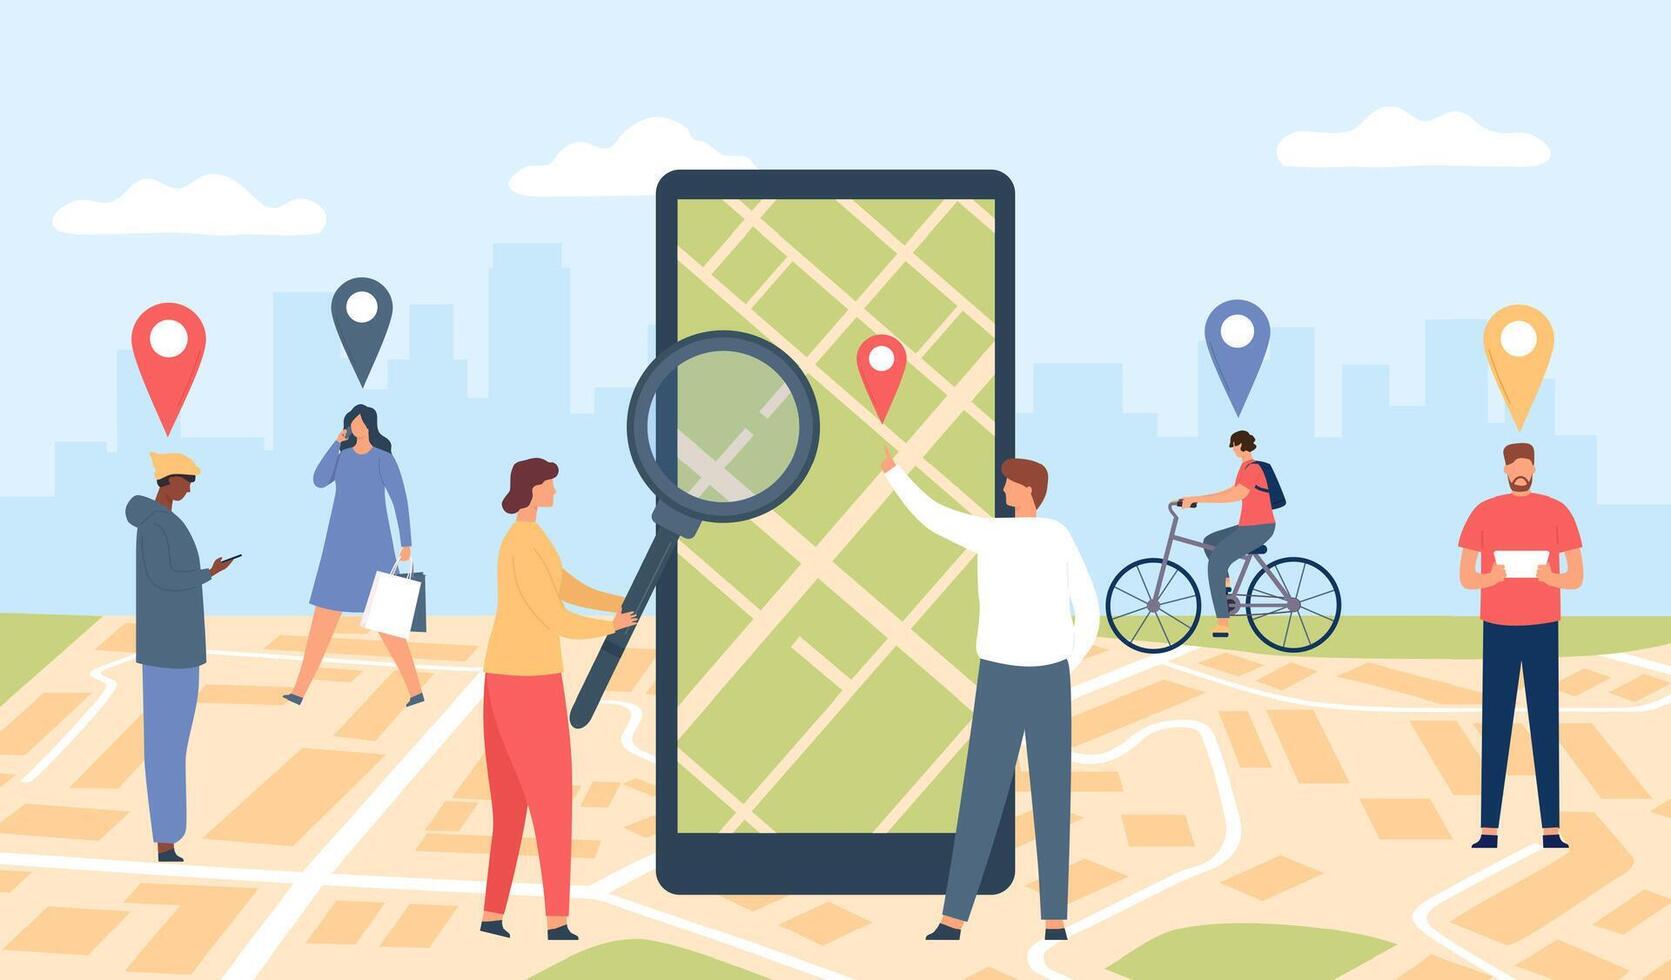 Tracking online application. Smartphone with GPS app on screen, city location map and walking people with pins. Geolocation vector concept